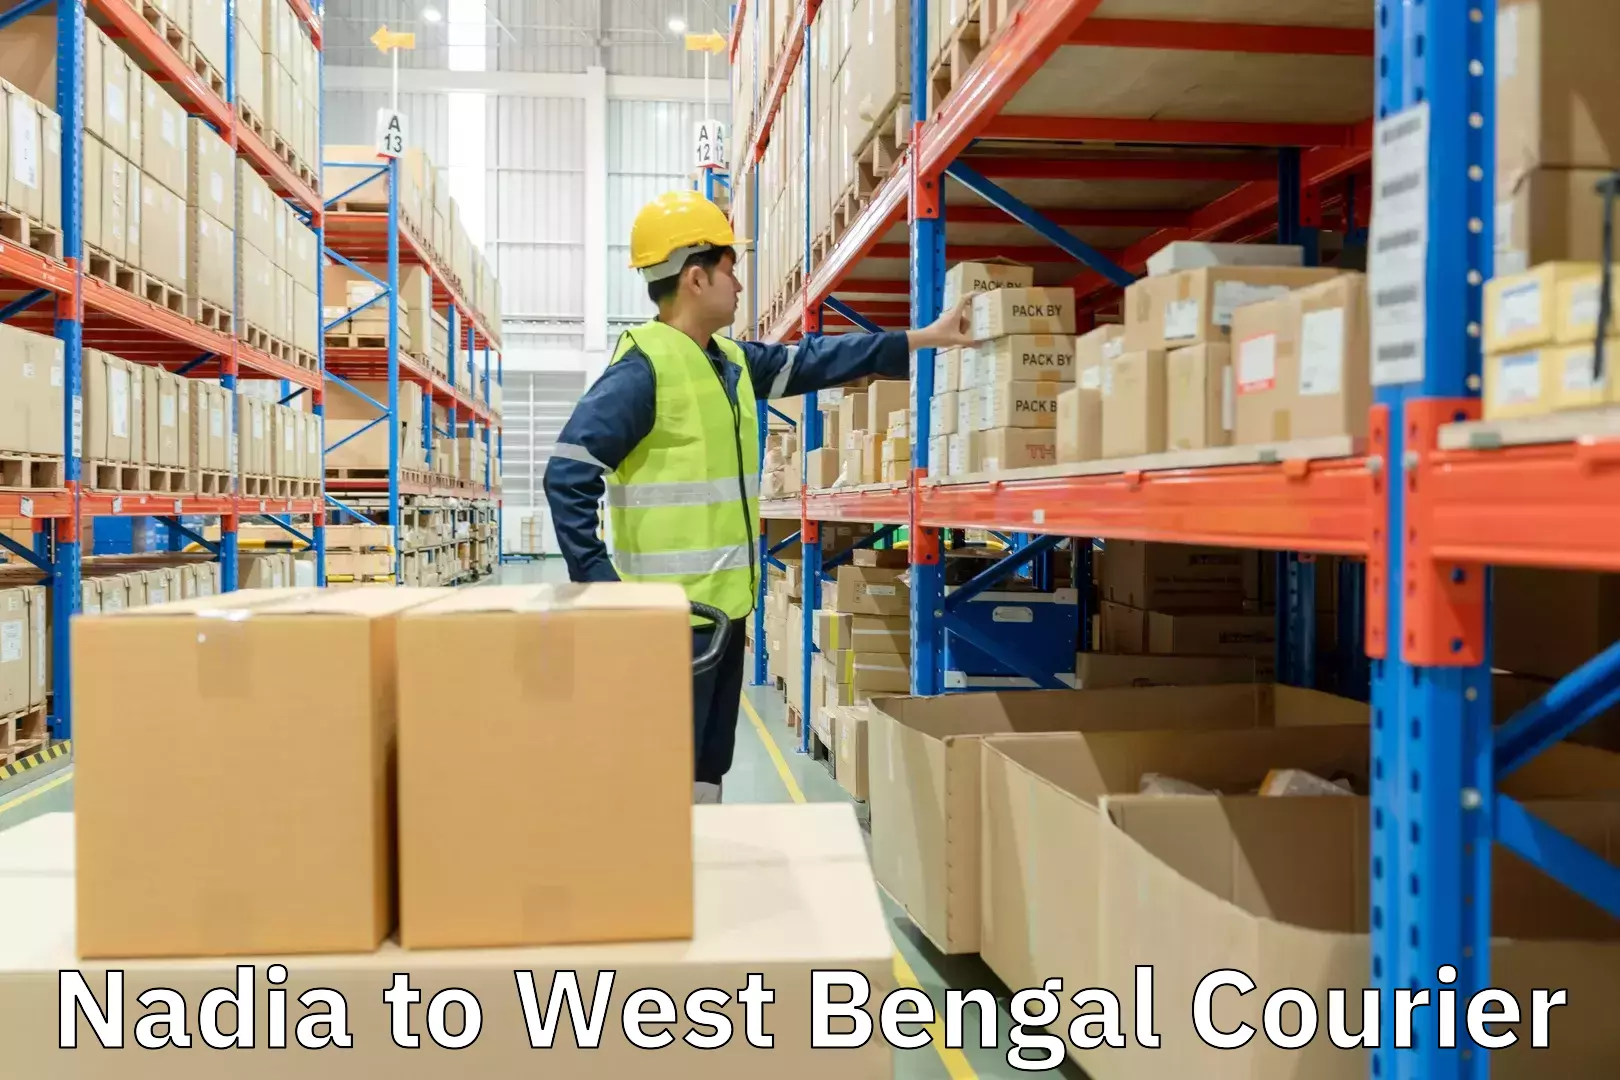 Punctual parcel services Nadia to West Bengal